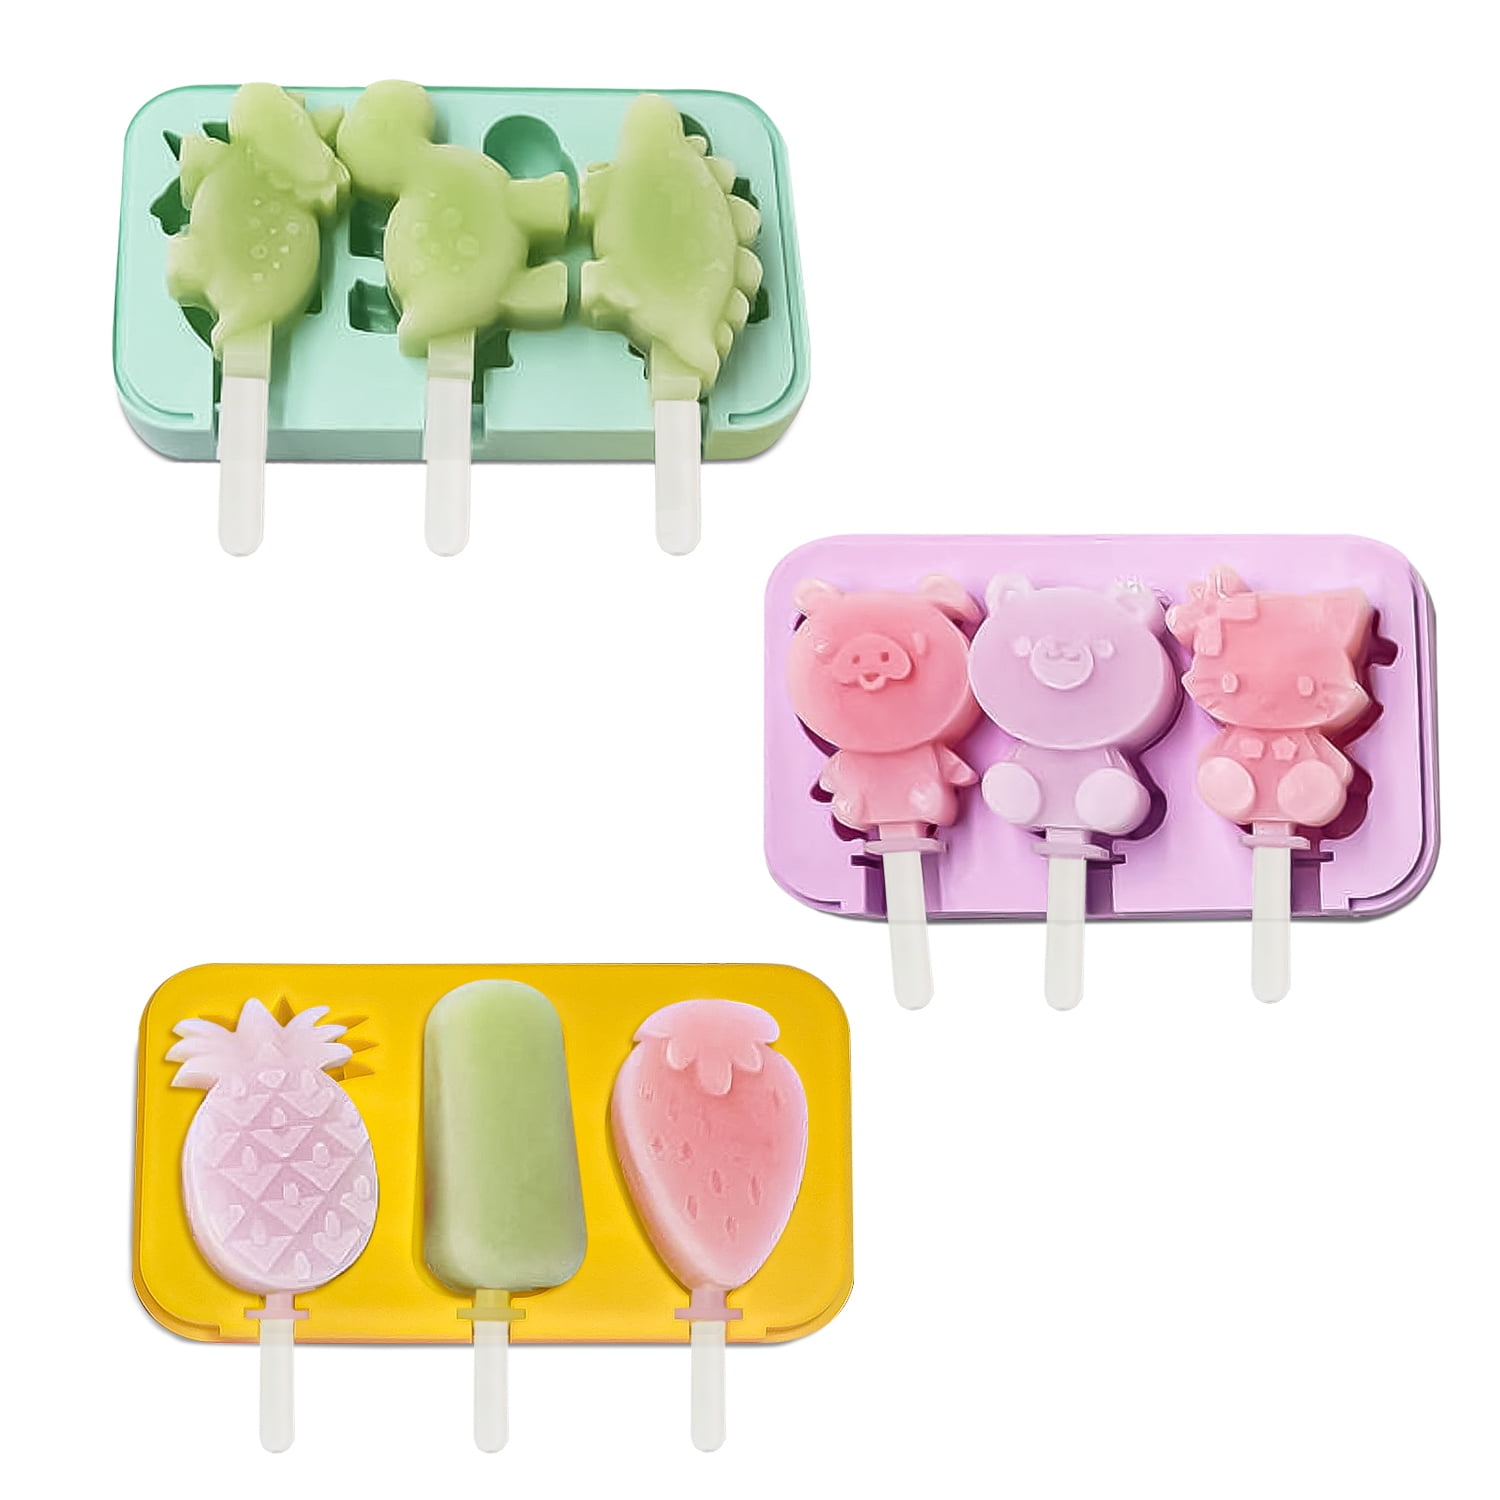 Tovolo Groovy Pop Molds – The Kitchen